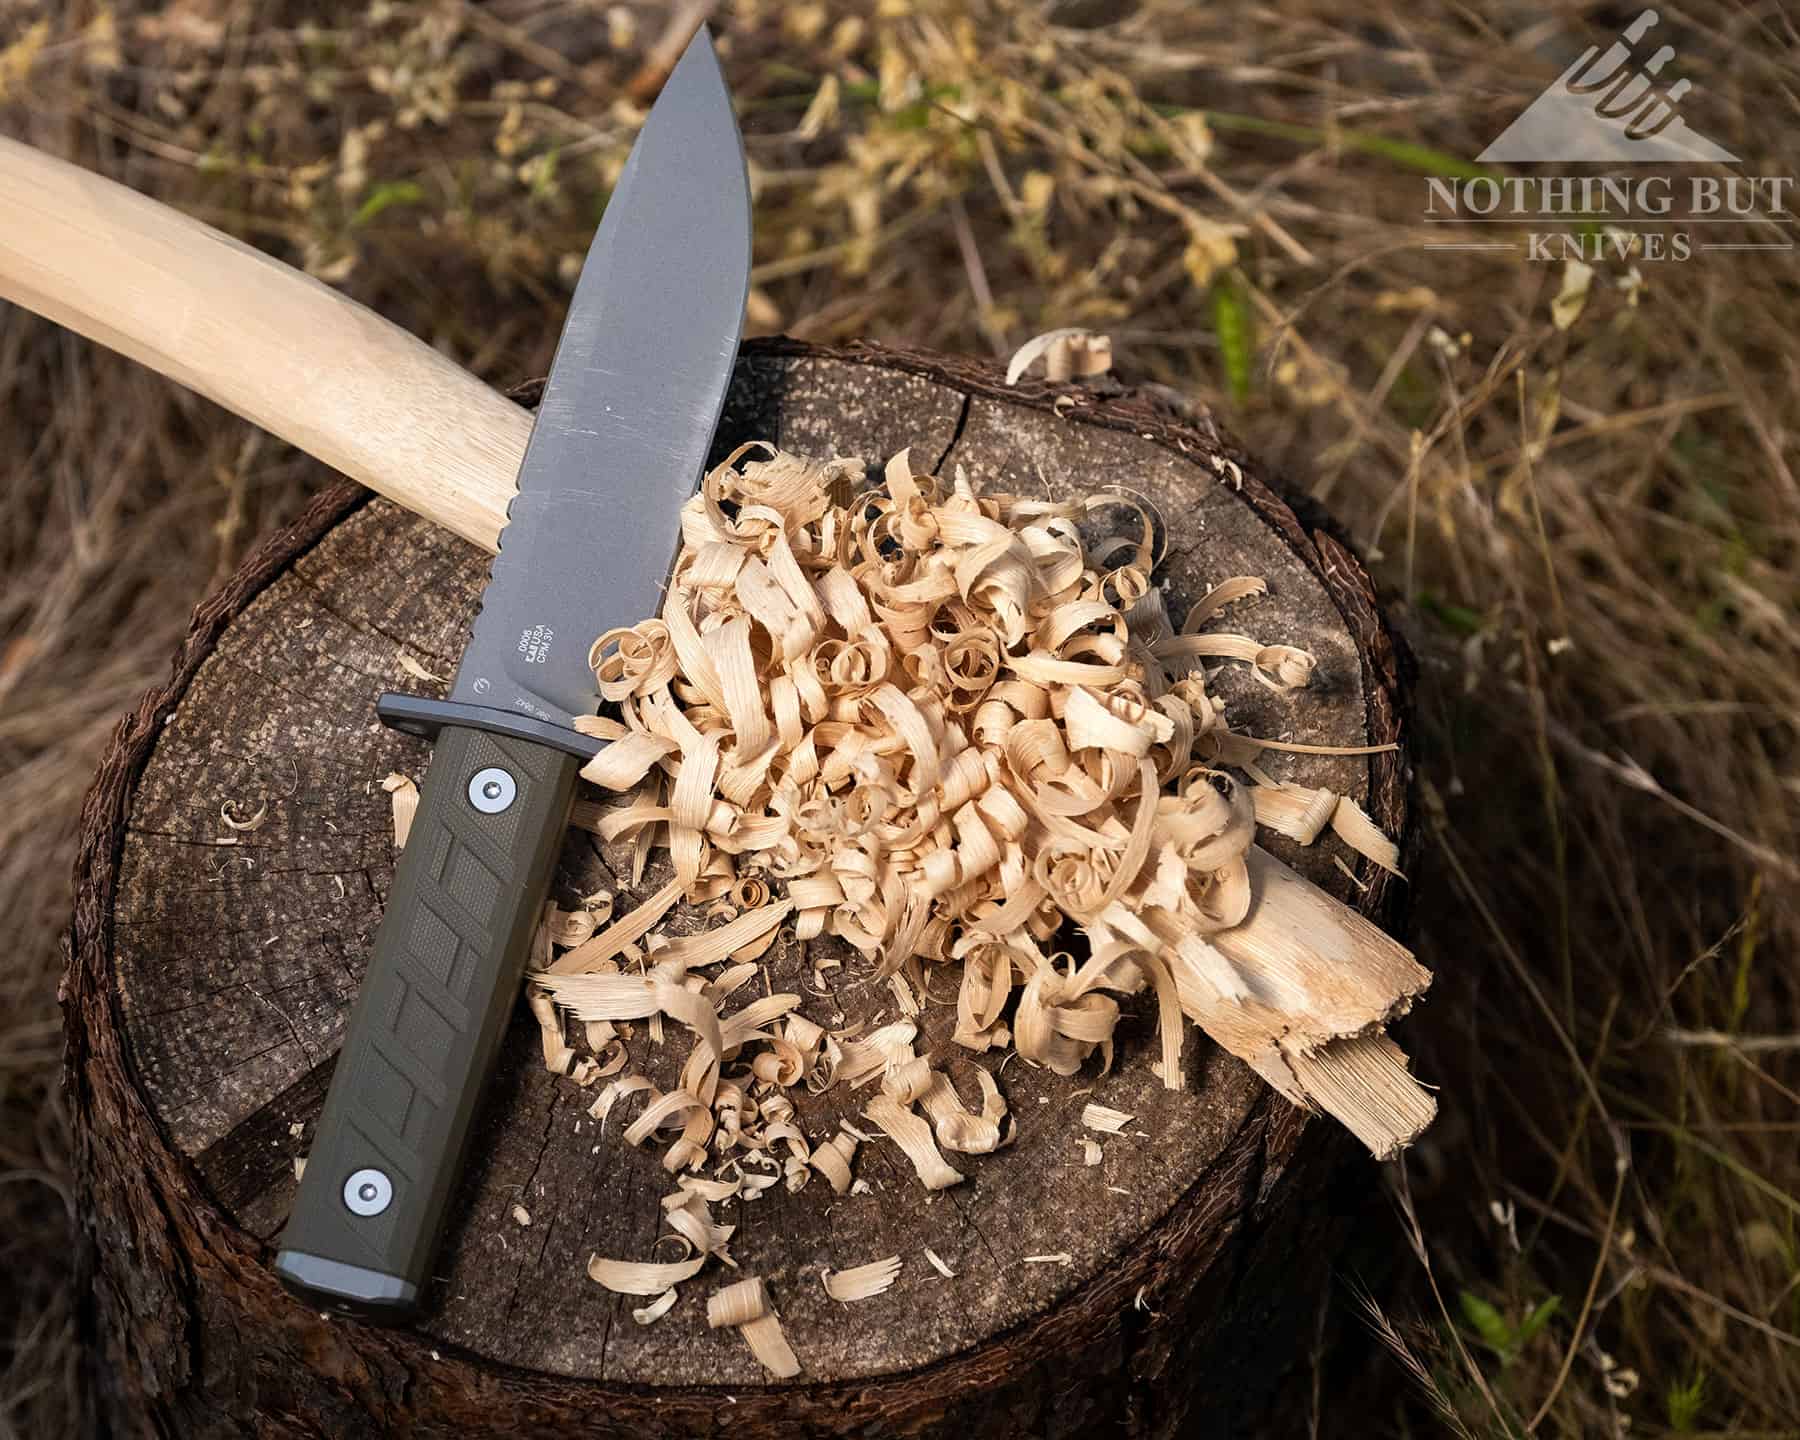 The Zero Tolerance 006 can make a good feather stick, but it not great for throwing spark with a ferro rod. 